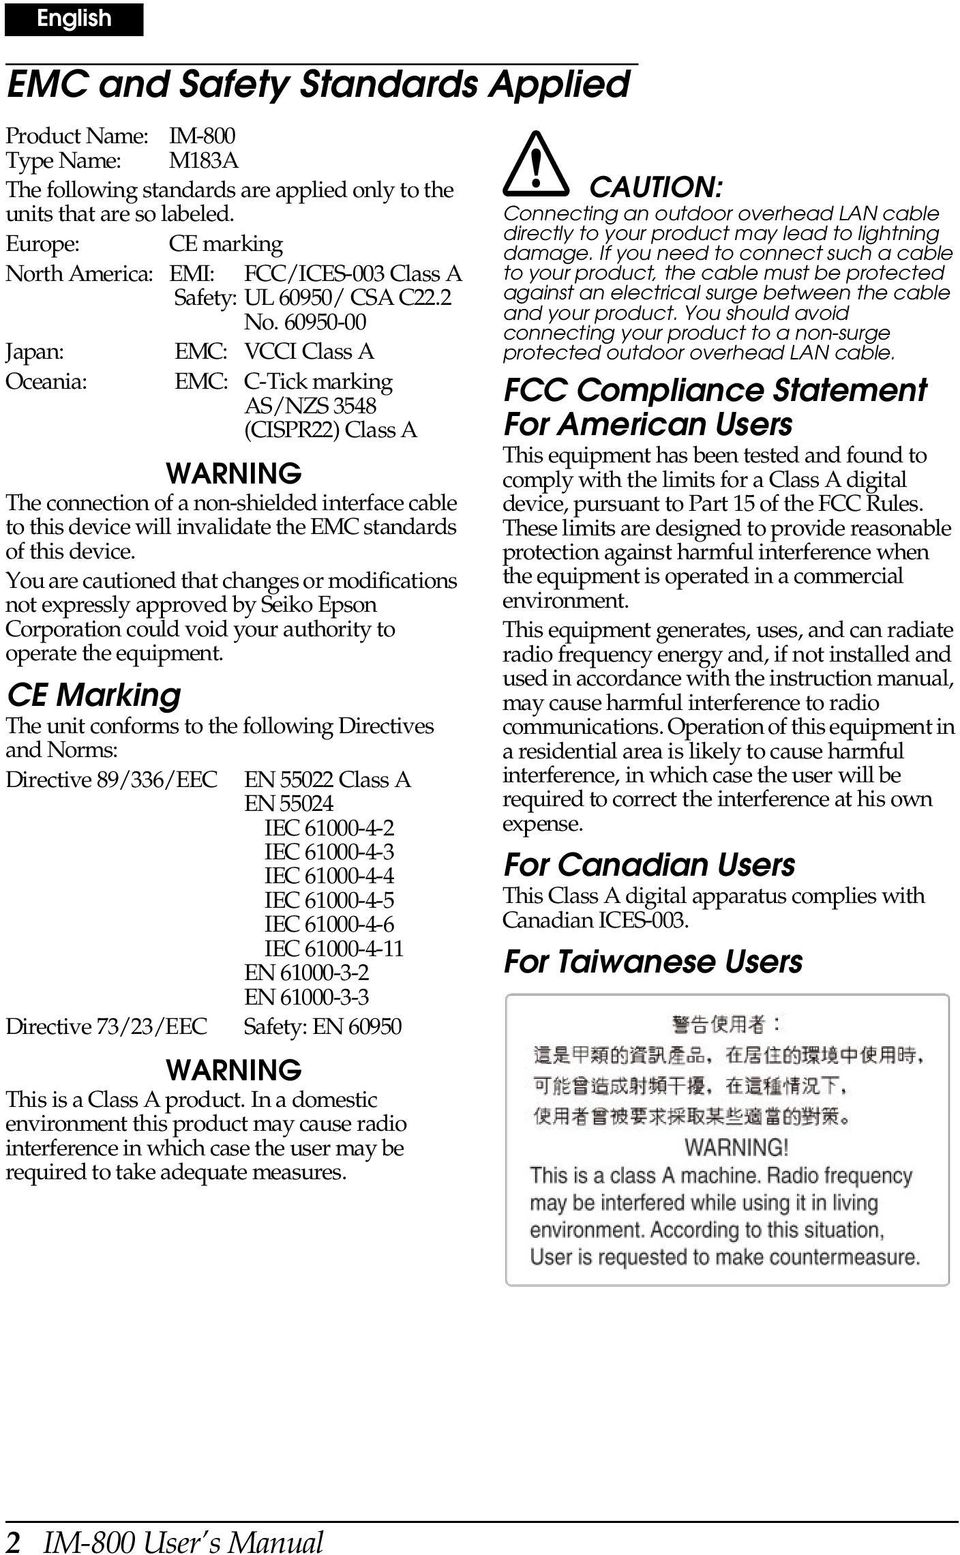 60950-00 Japan: EMC: VCCI Class A Oceania: EMC: C-Tick marking AS/NZS 3548 (CISPR22) Class A WARNING The connection of a non-shielded interface cable to this device will invalidate the EMC standards